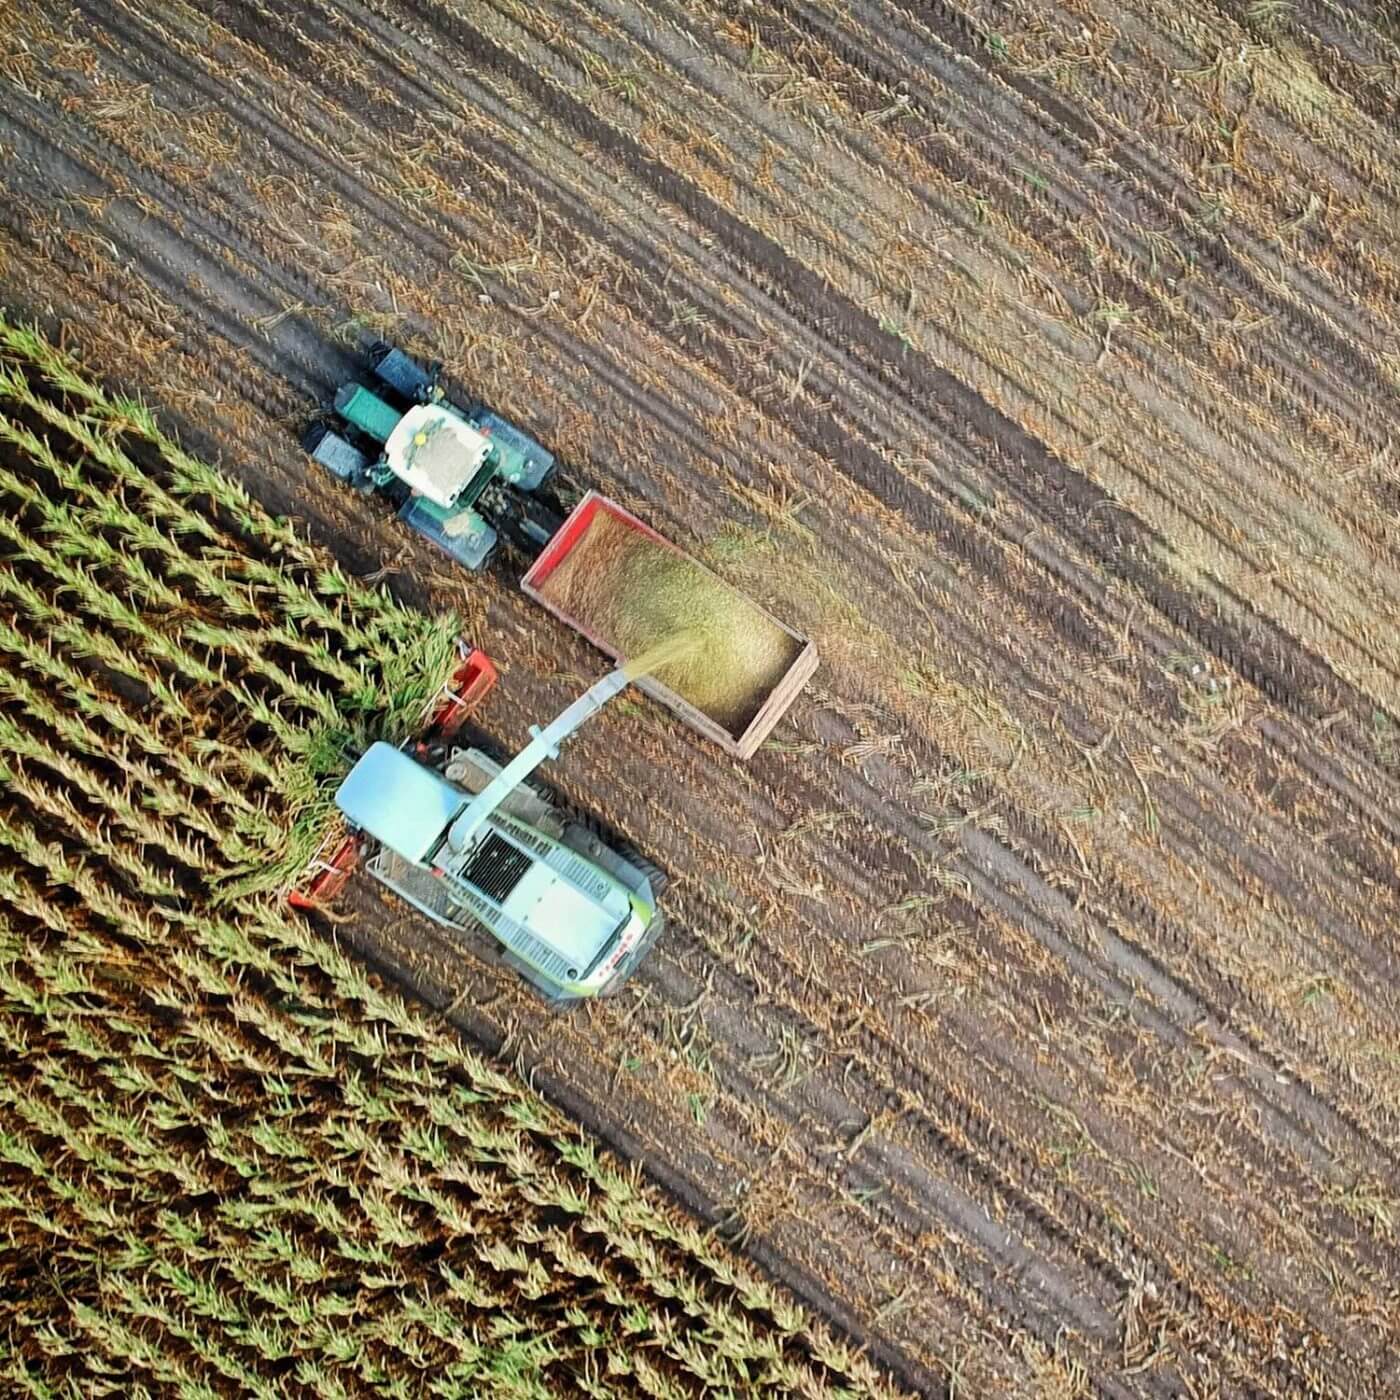 Two trucks in an agricultural field harvesting crops.